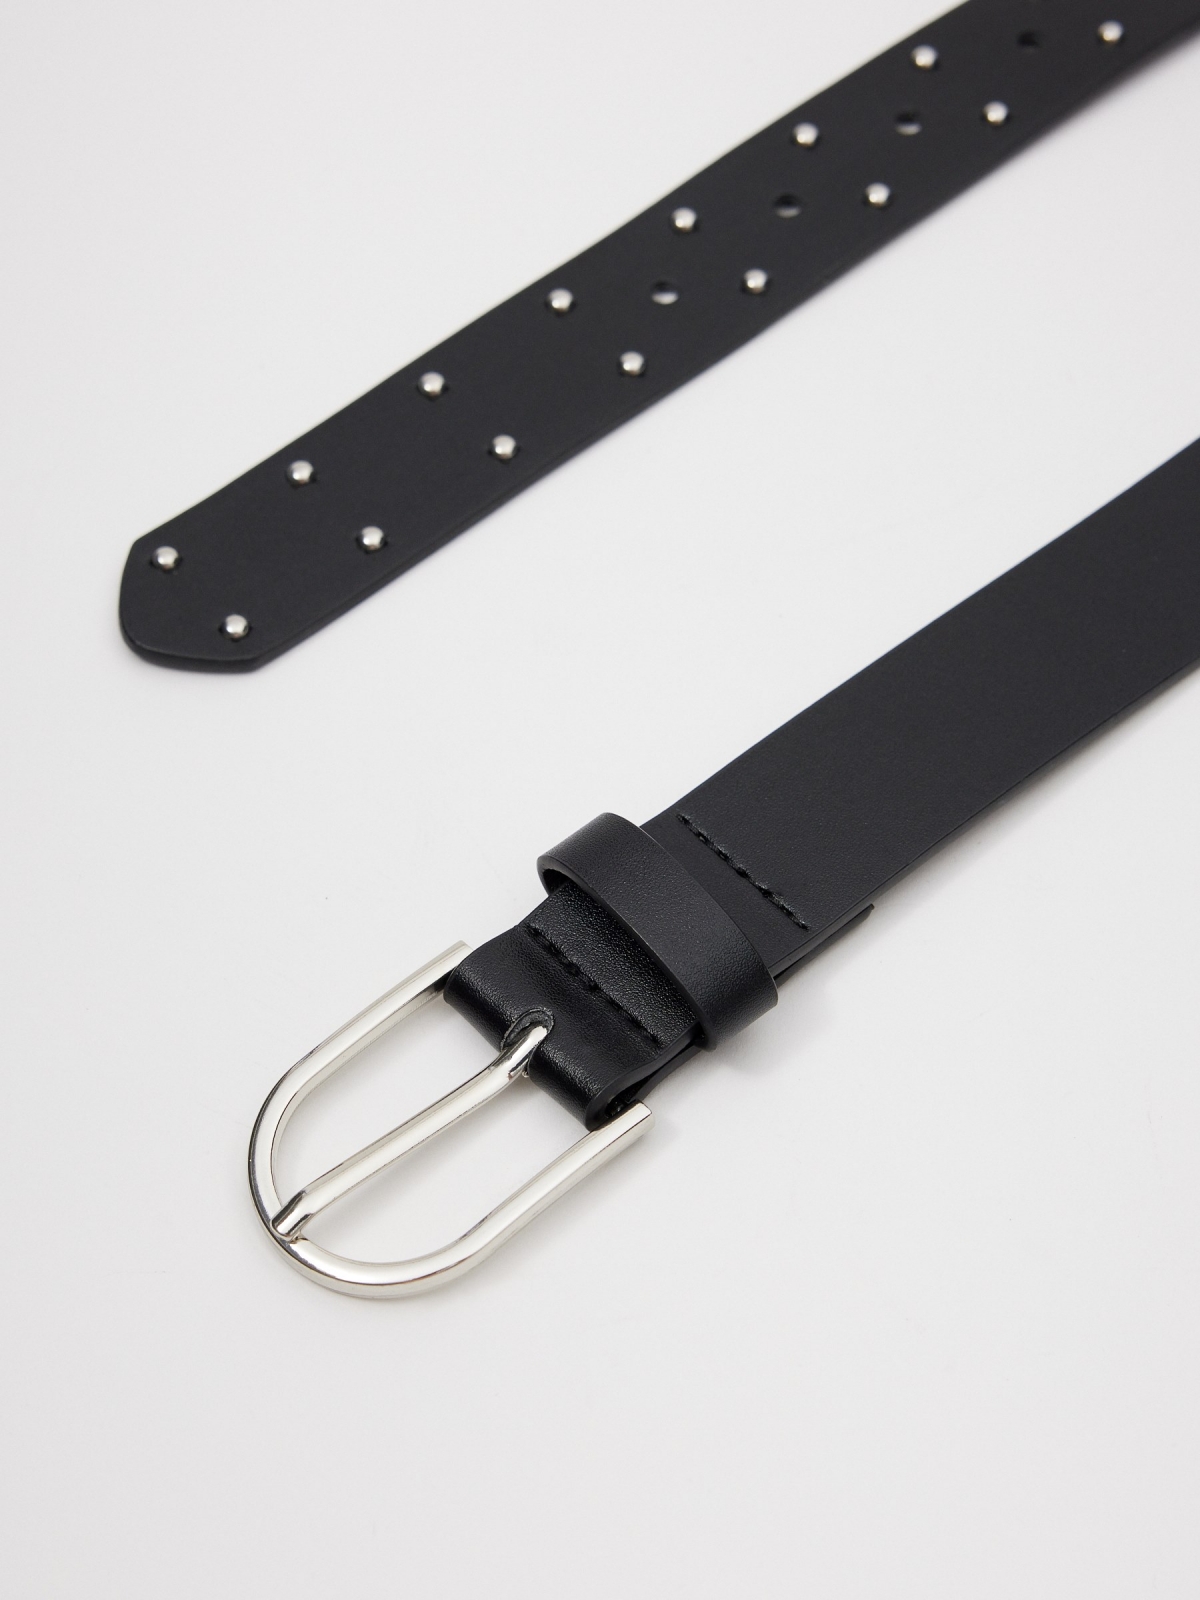 Buckle and studded belt black detail view